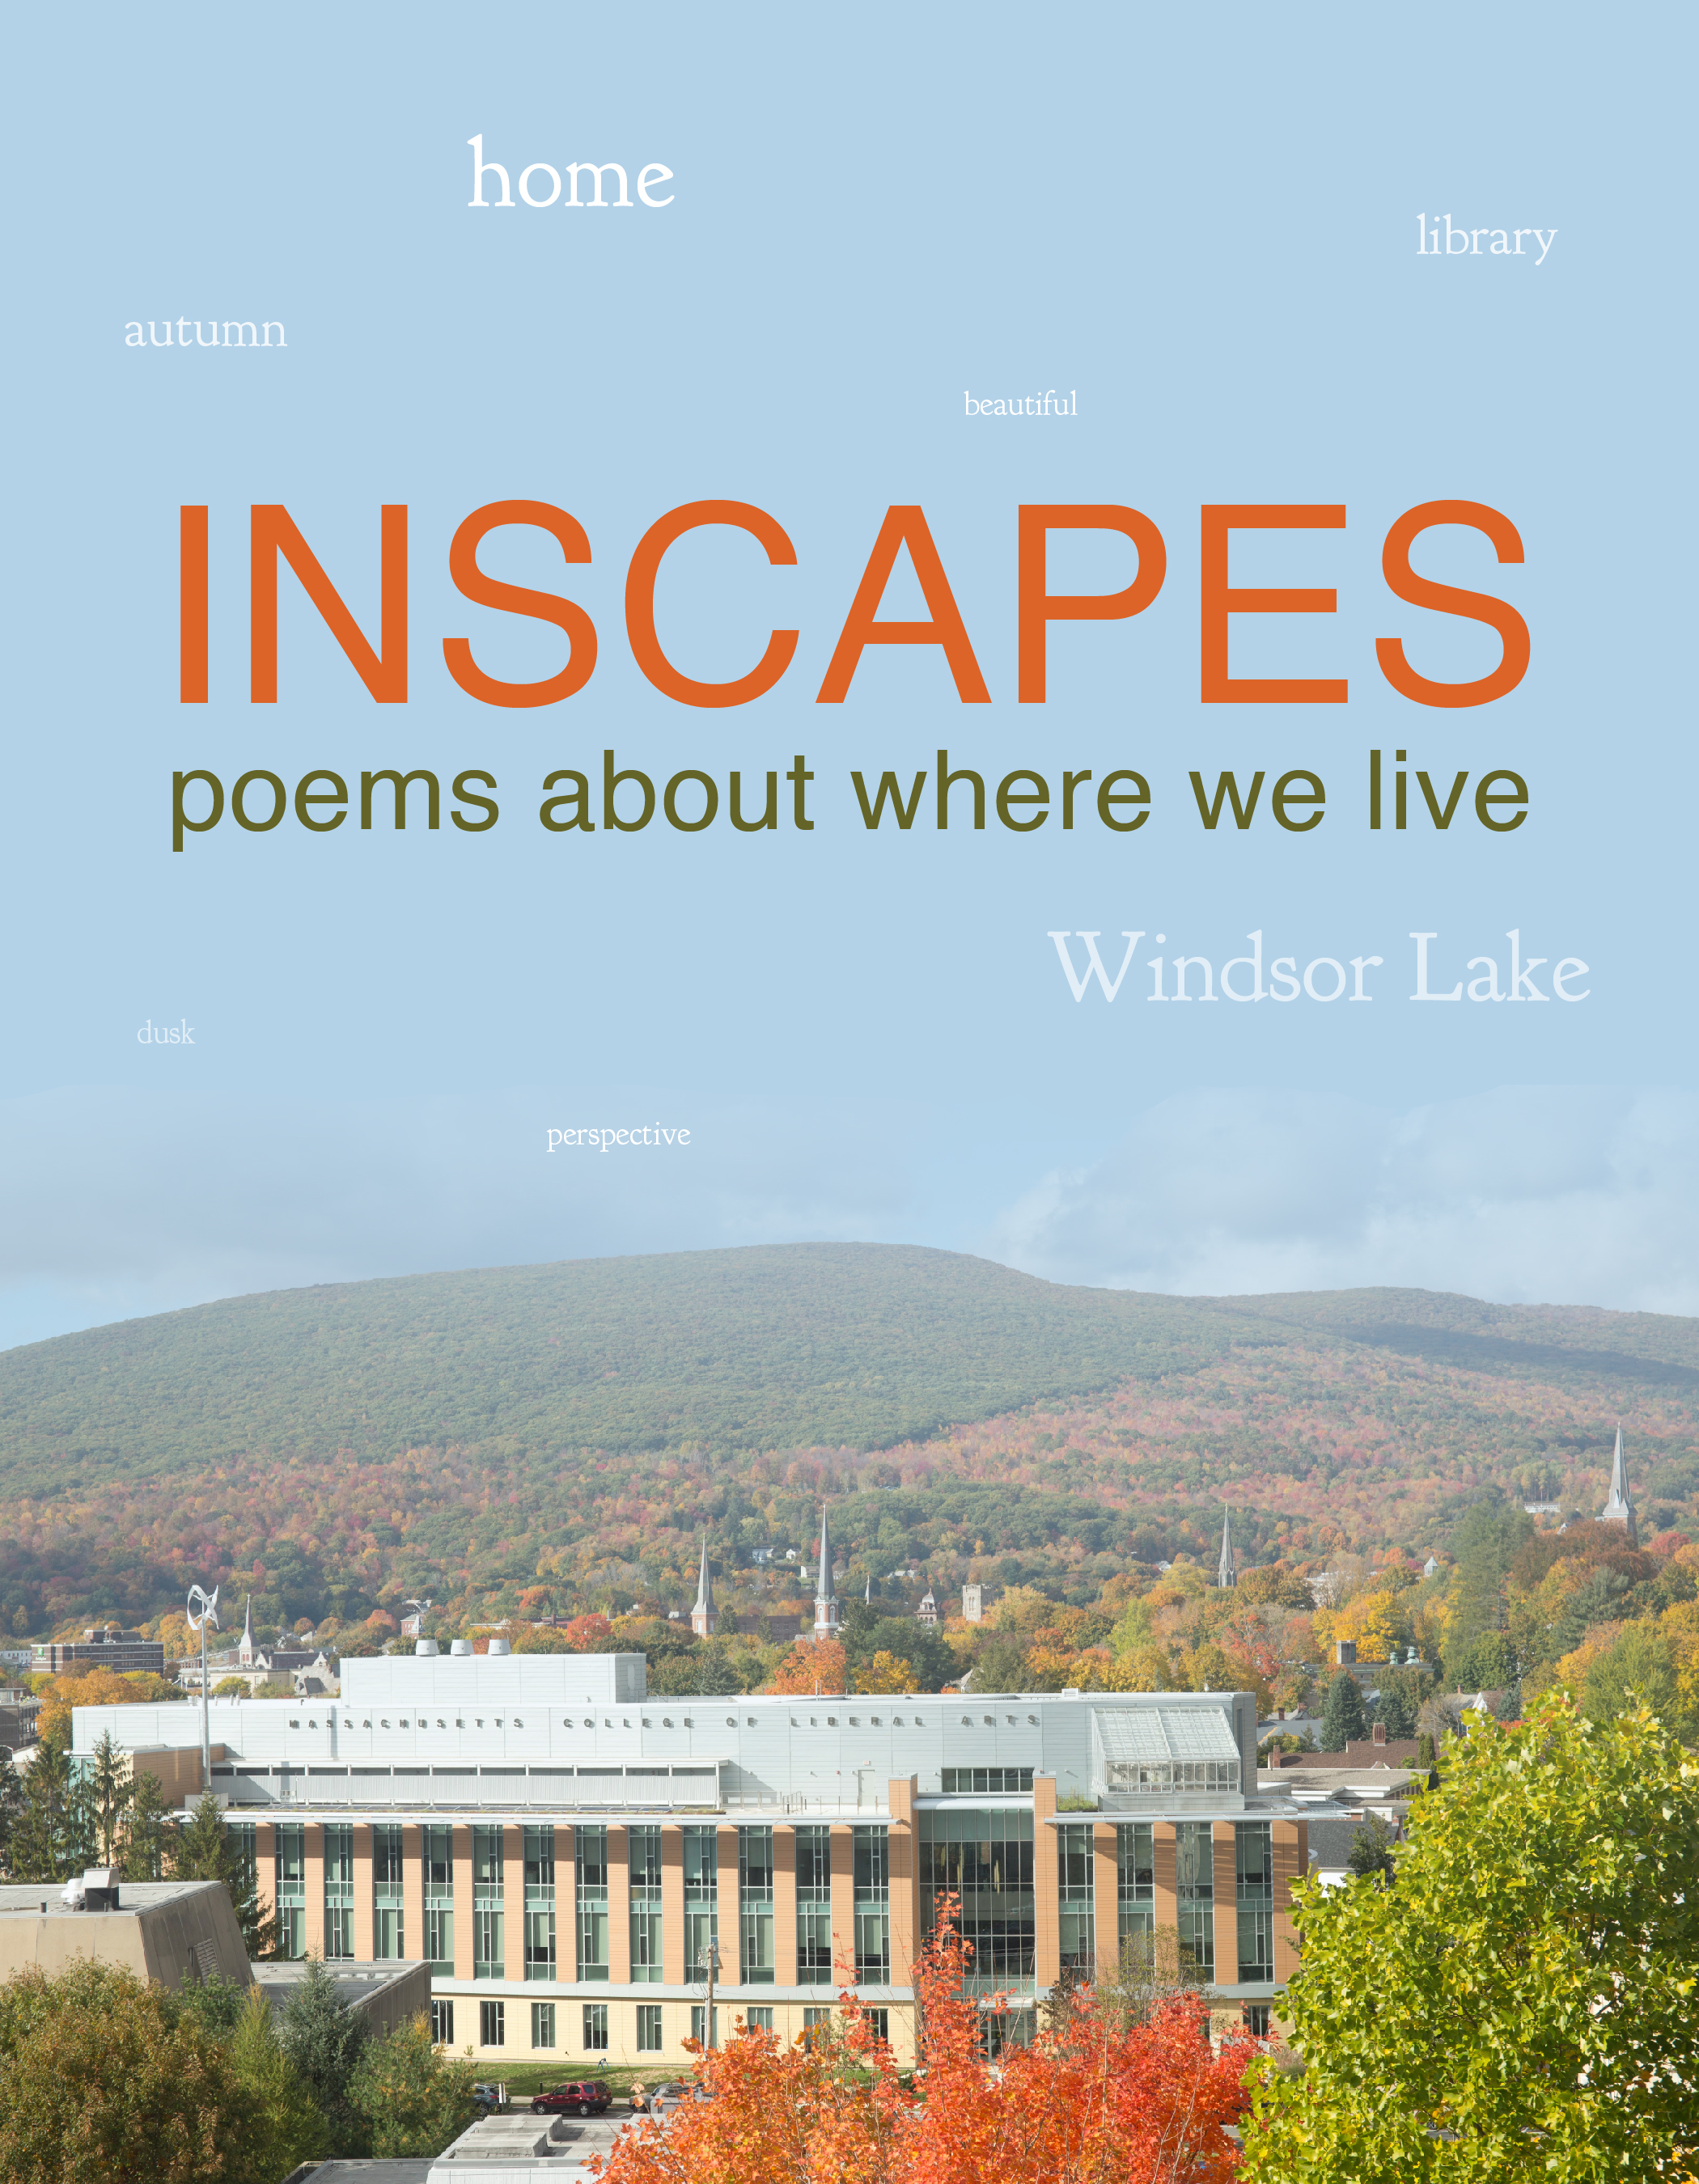 Front book cover with the text INSCAPES - poems about where we live